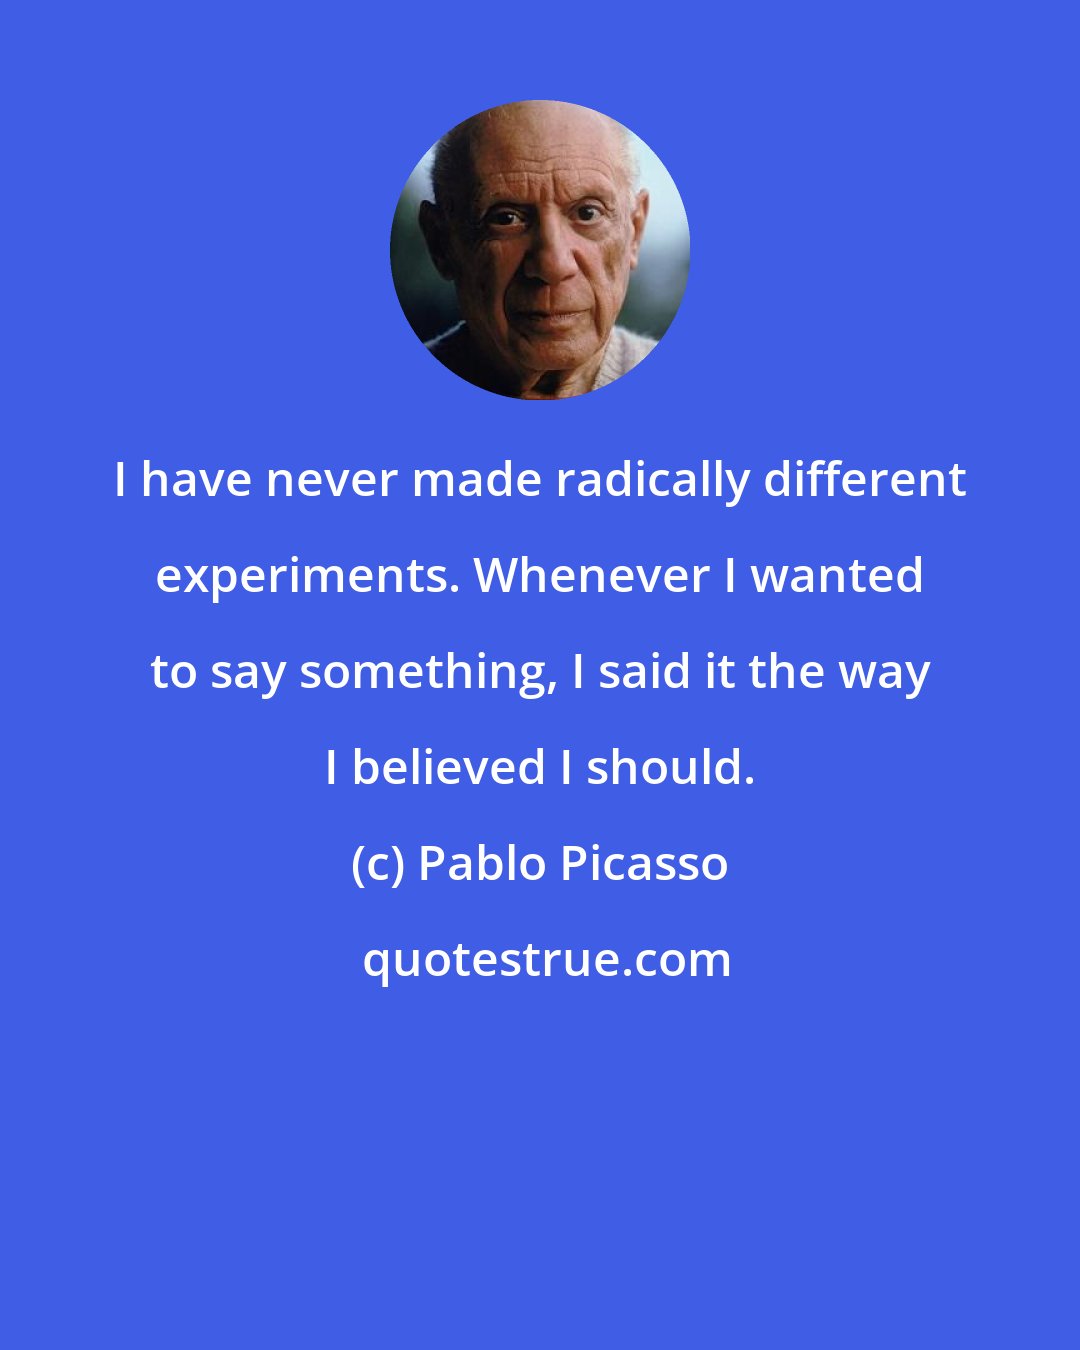 Pablo Picasso: I have never made radically different experiments. Whenever I wanted to say something, I said it the way I believed I should.